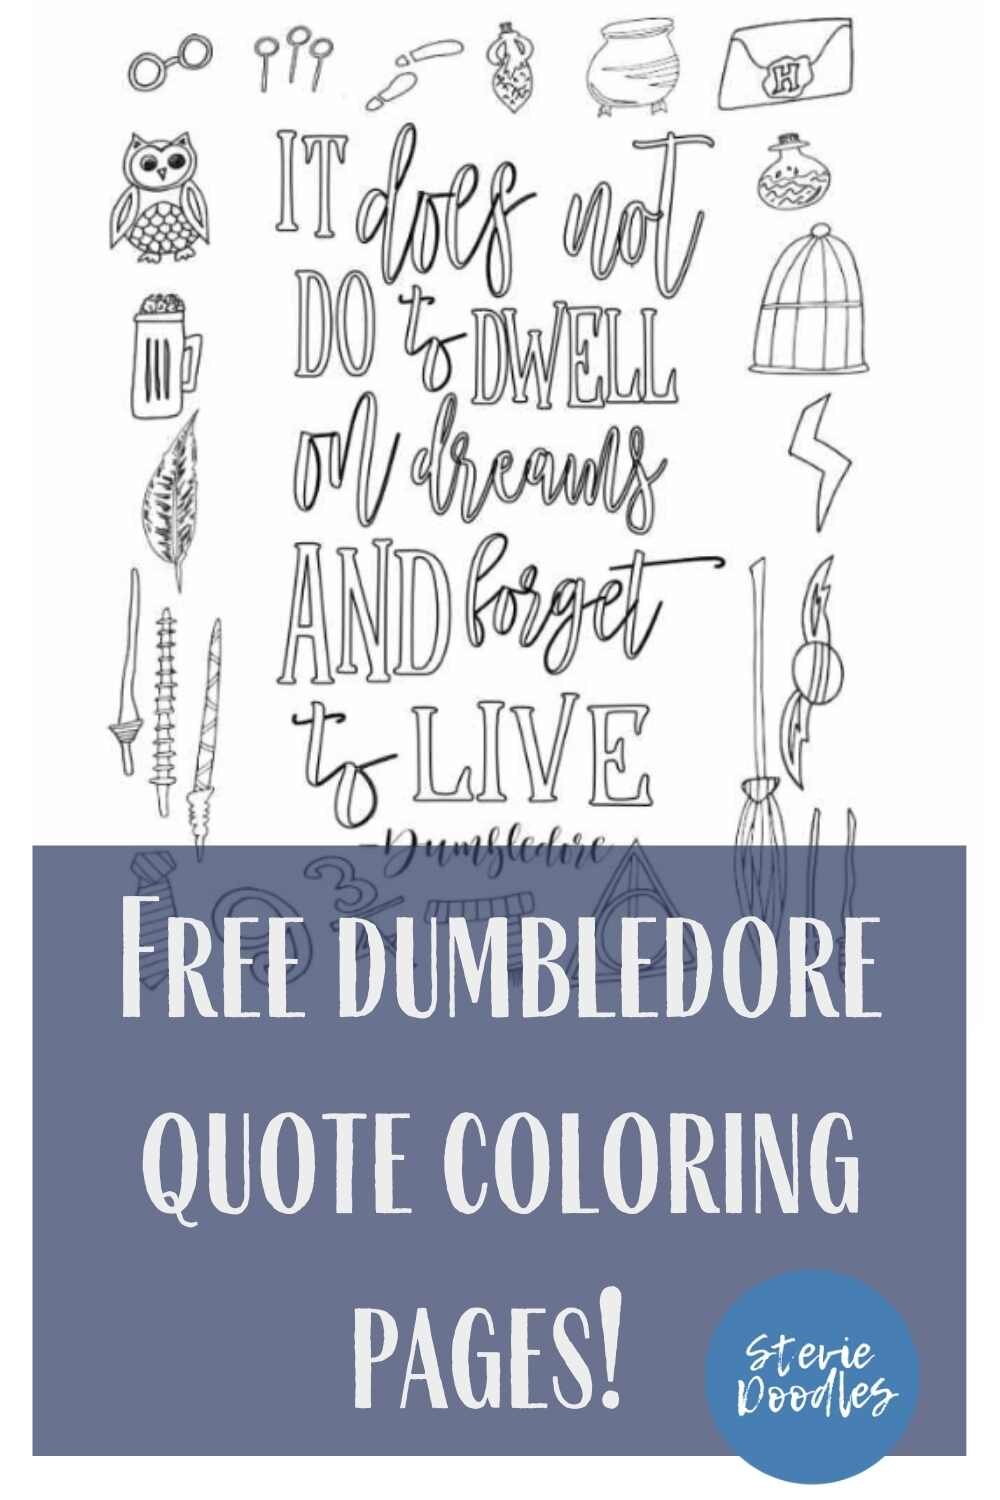 Free harry potter quote coloring pages